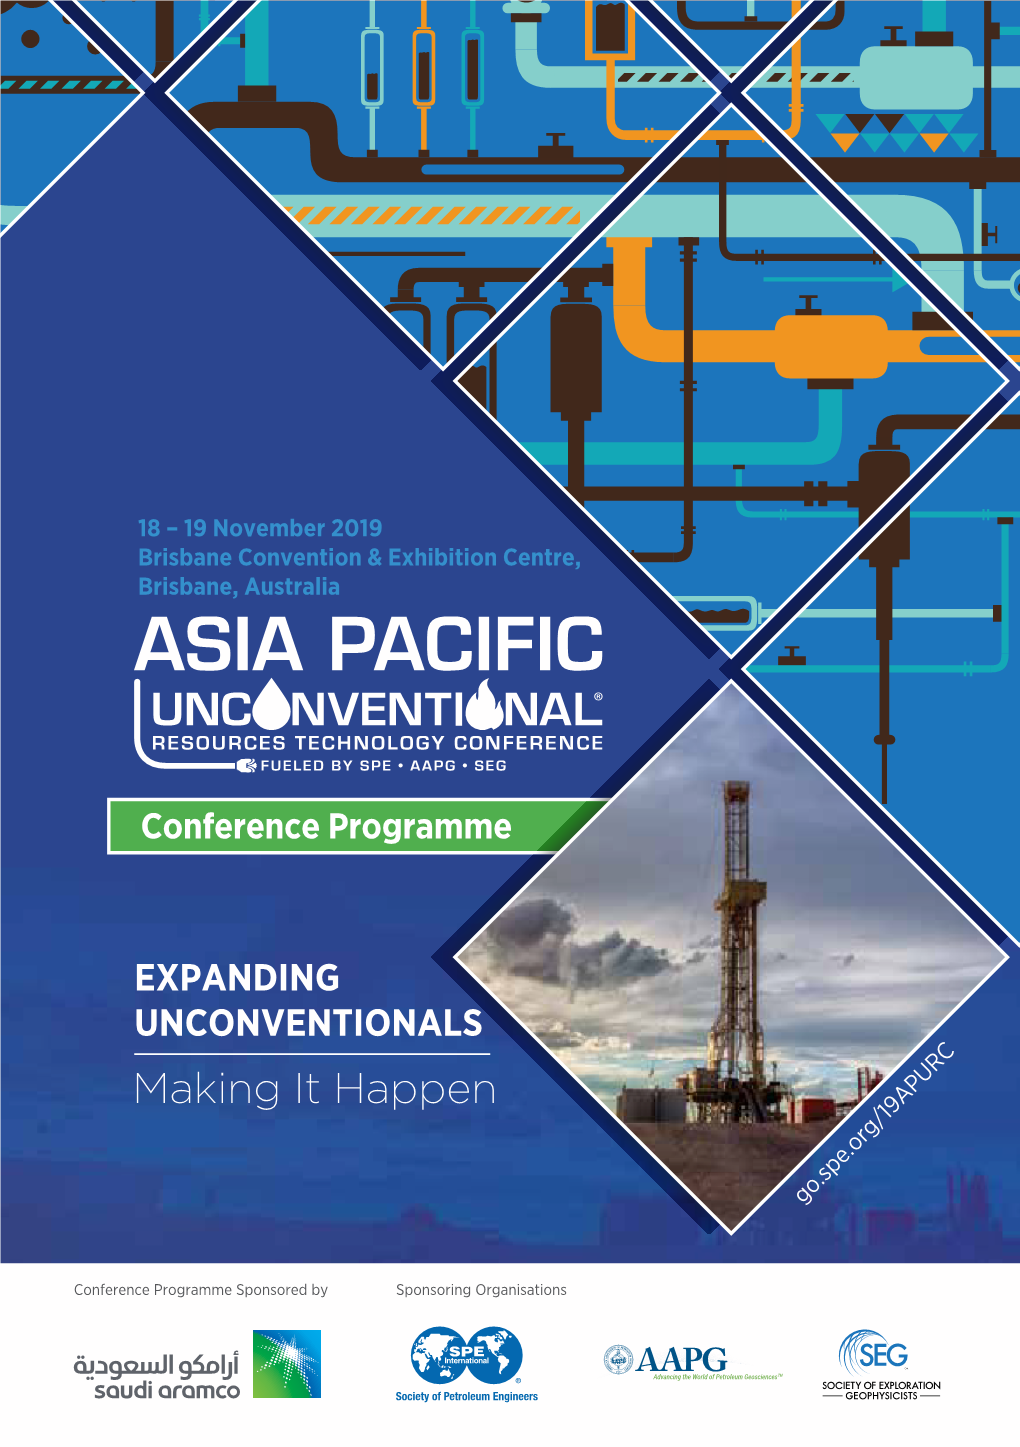 Asia Pacific Urtec 2019 | Conference Programme